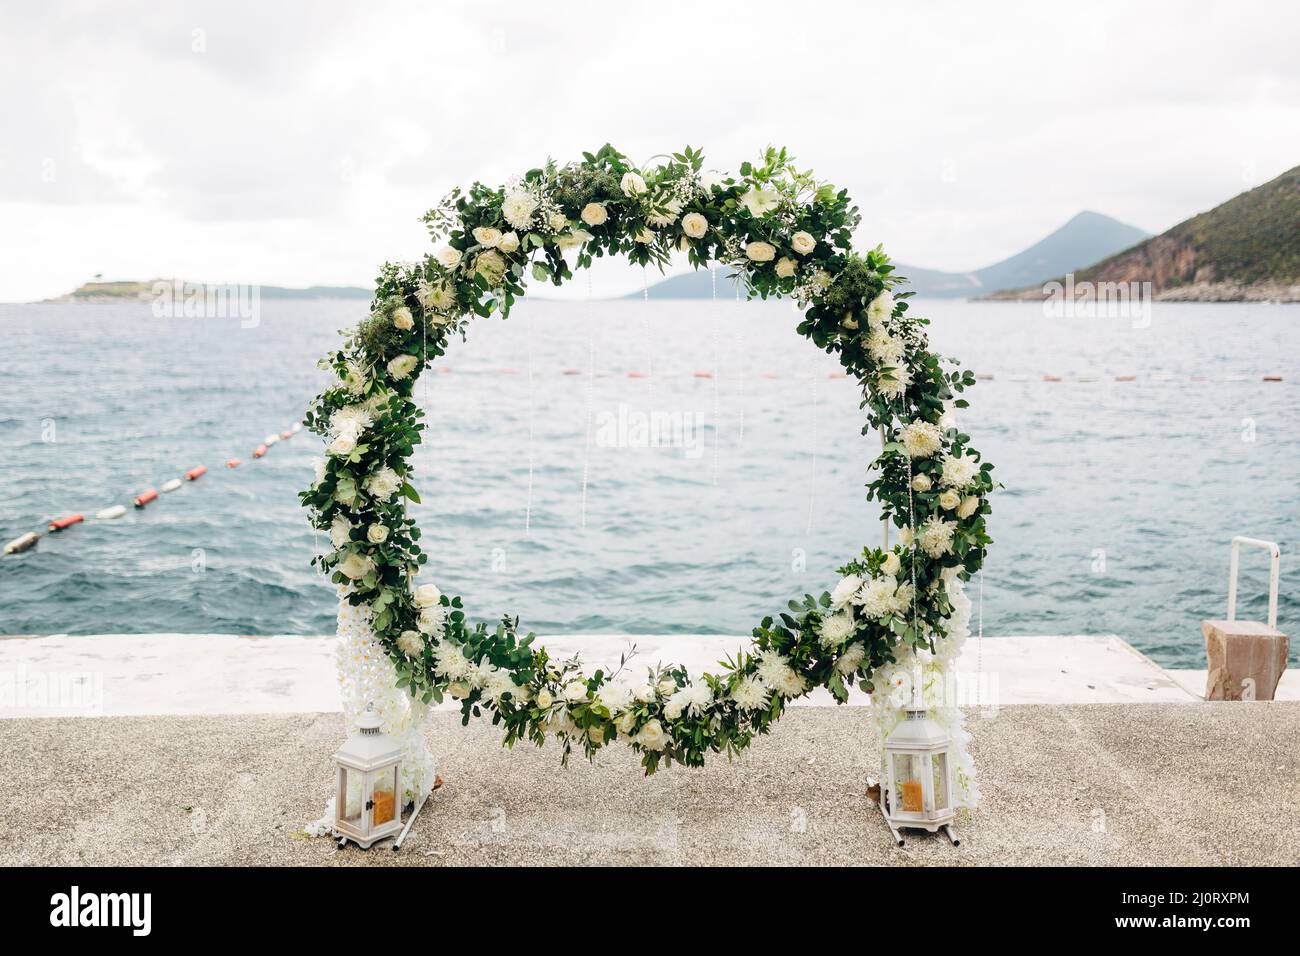 Round wedding arch woven of roses and green leaves stands on the pier Stock Photo